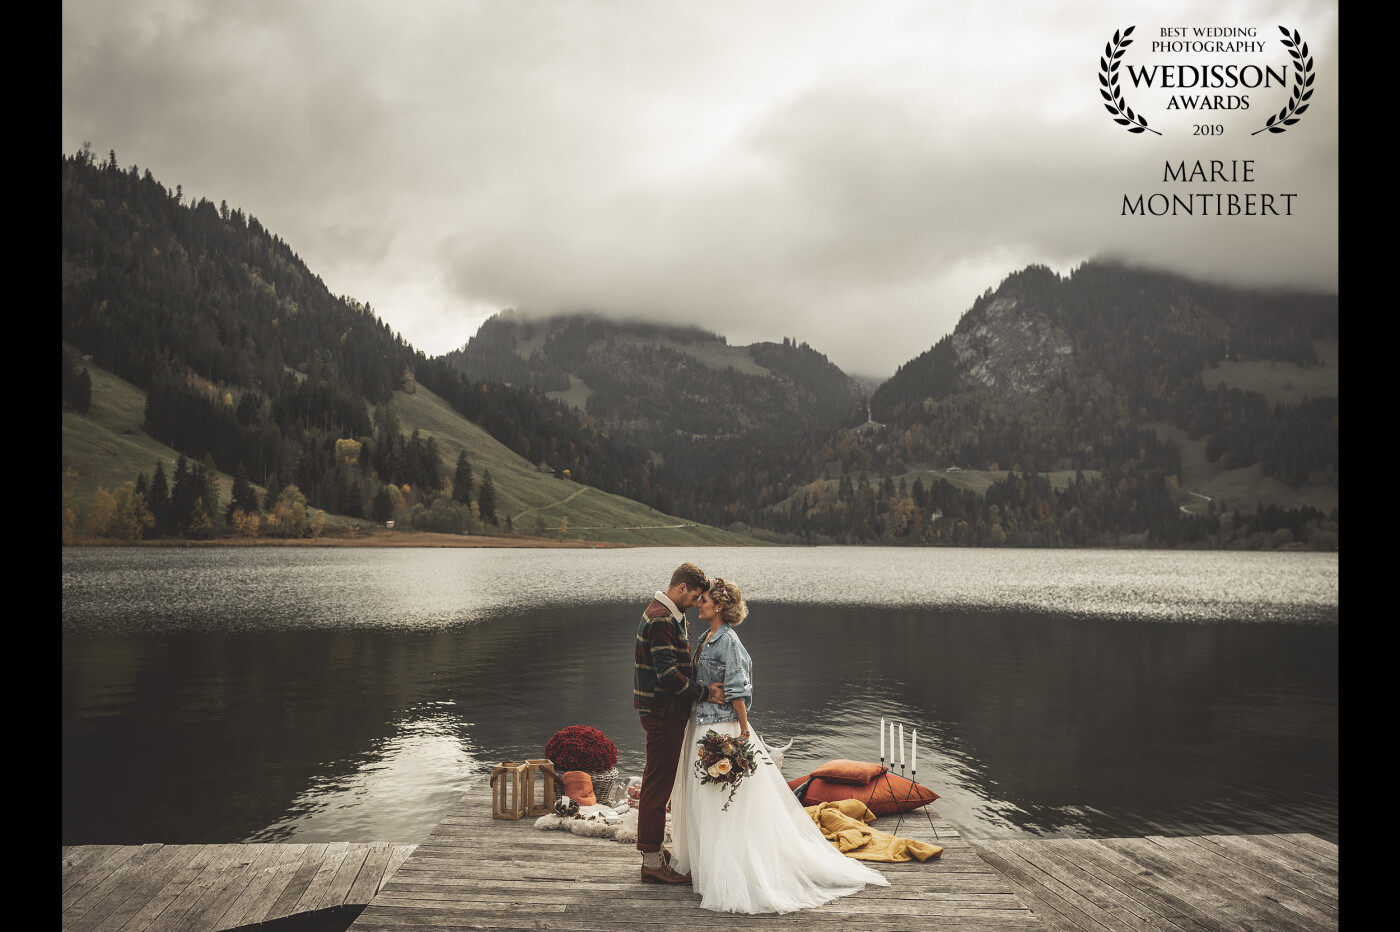 Those two, tortured amants of the Schwarzsee Lake in The Bernes Alps, are the image and the legacy of an old and beautiful legend full of love. Find soon more details on my blog! I tell you everything about this story...